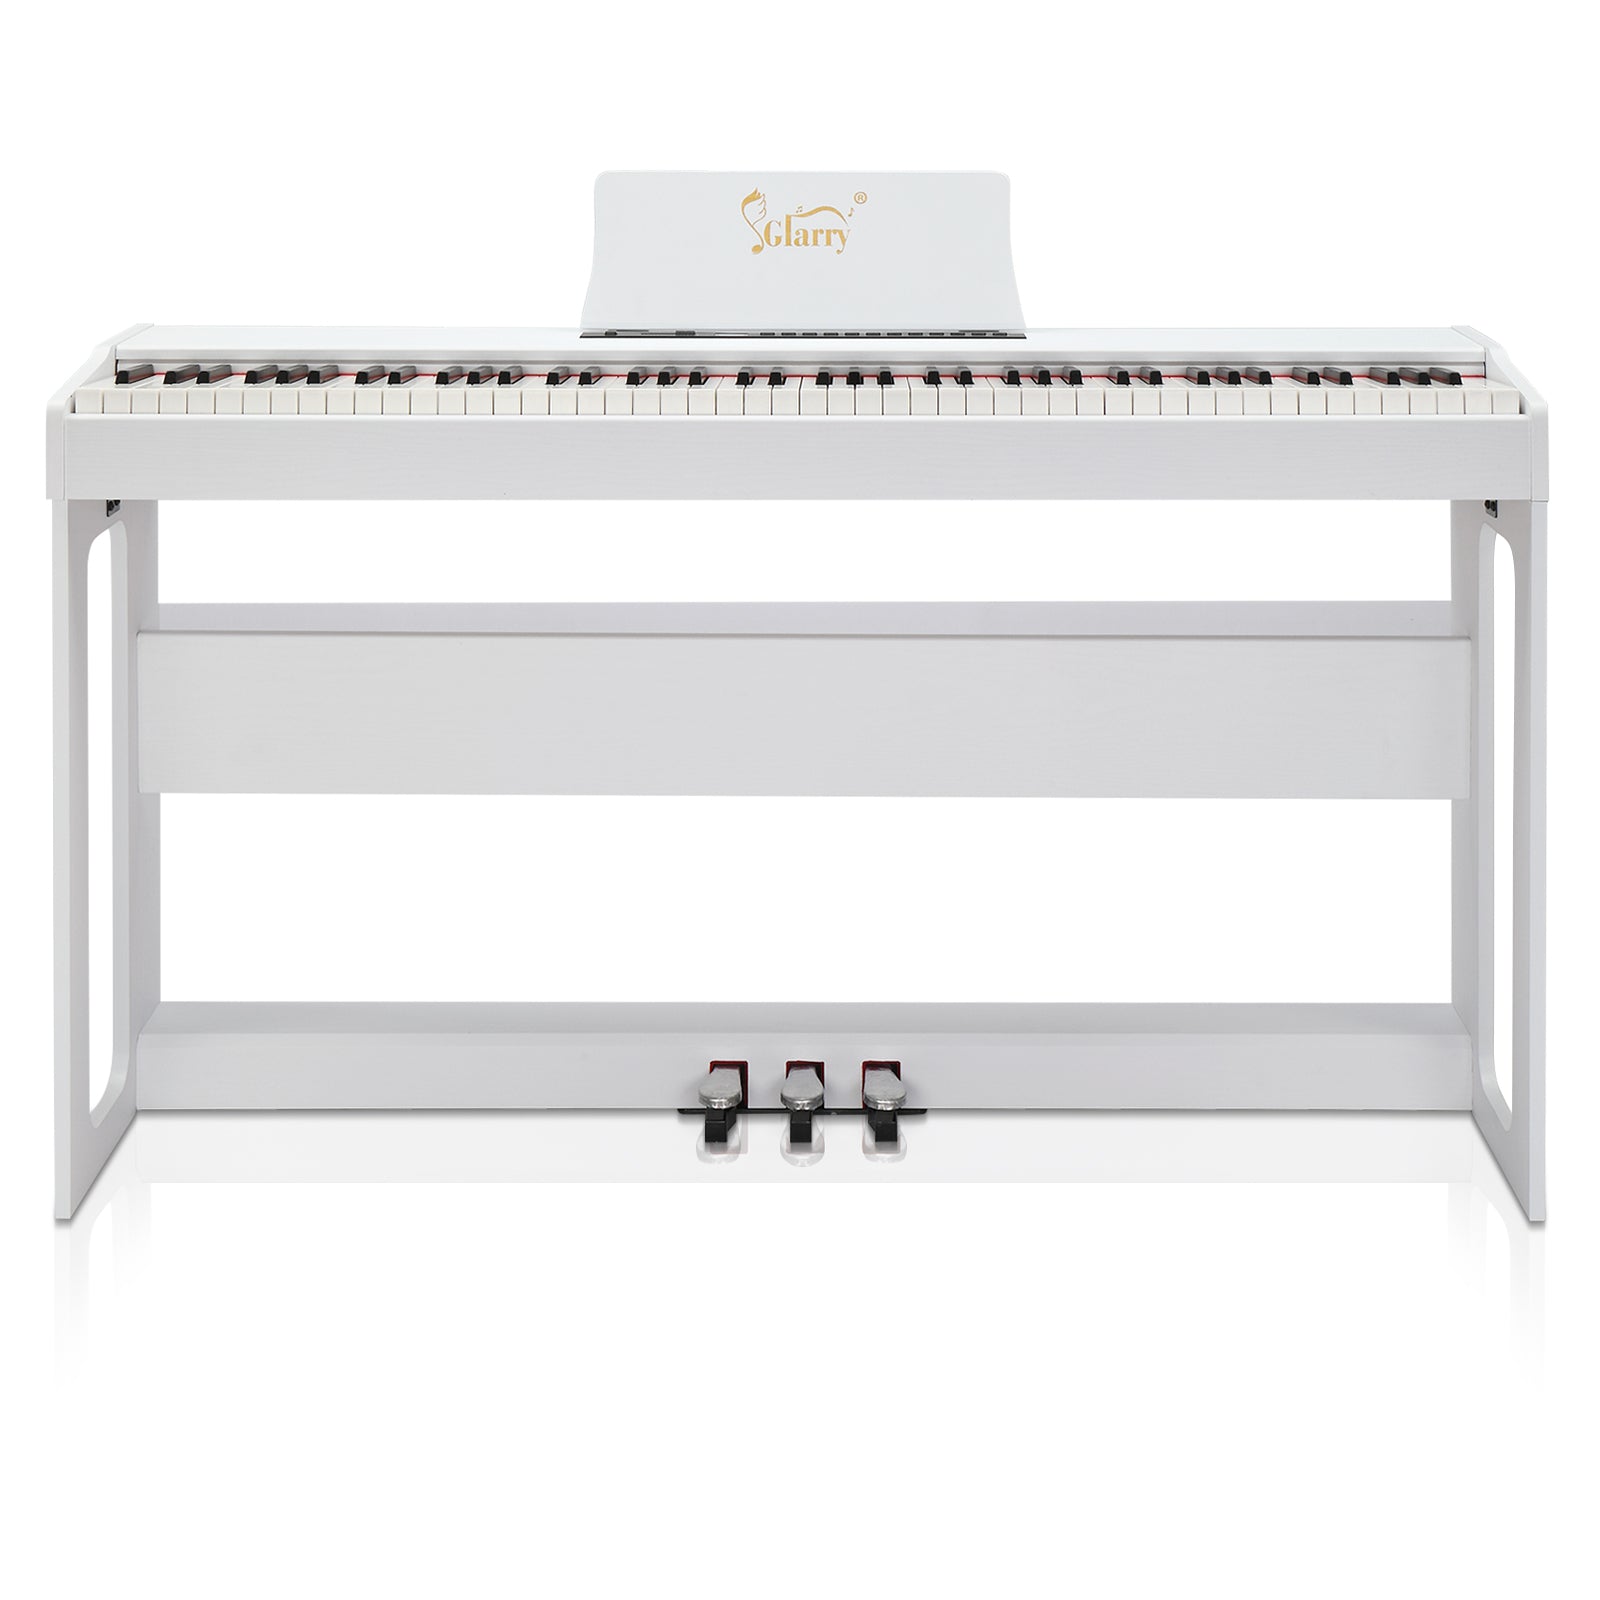 Glarry GDP-104 88 Keys Weighted Keyboards Digital Piano with Furniture Stand, Power Adapter, Triple Pedals, and Headphones White